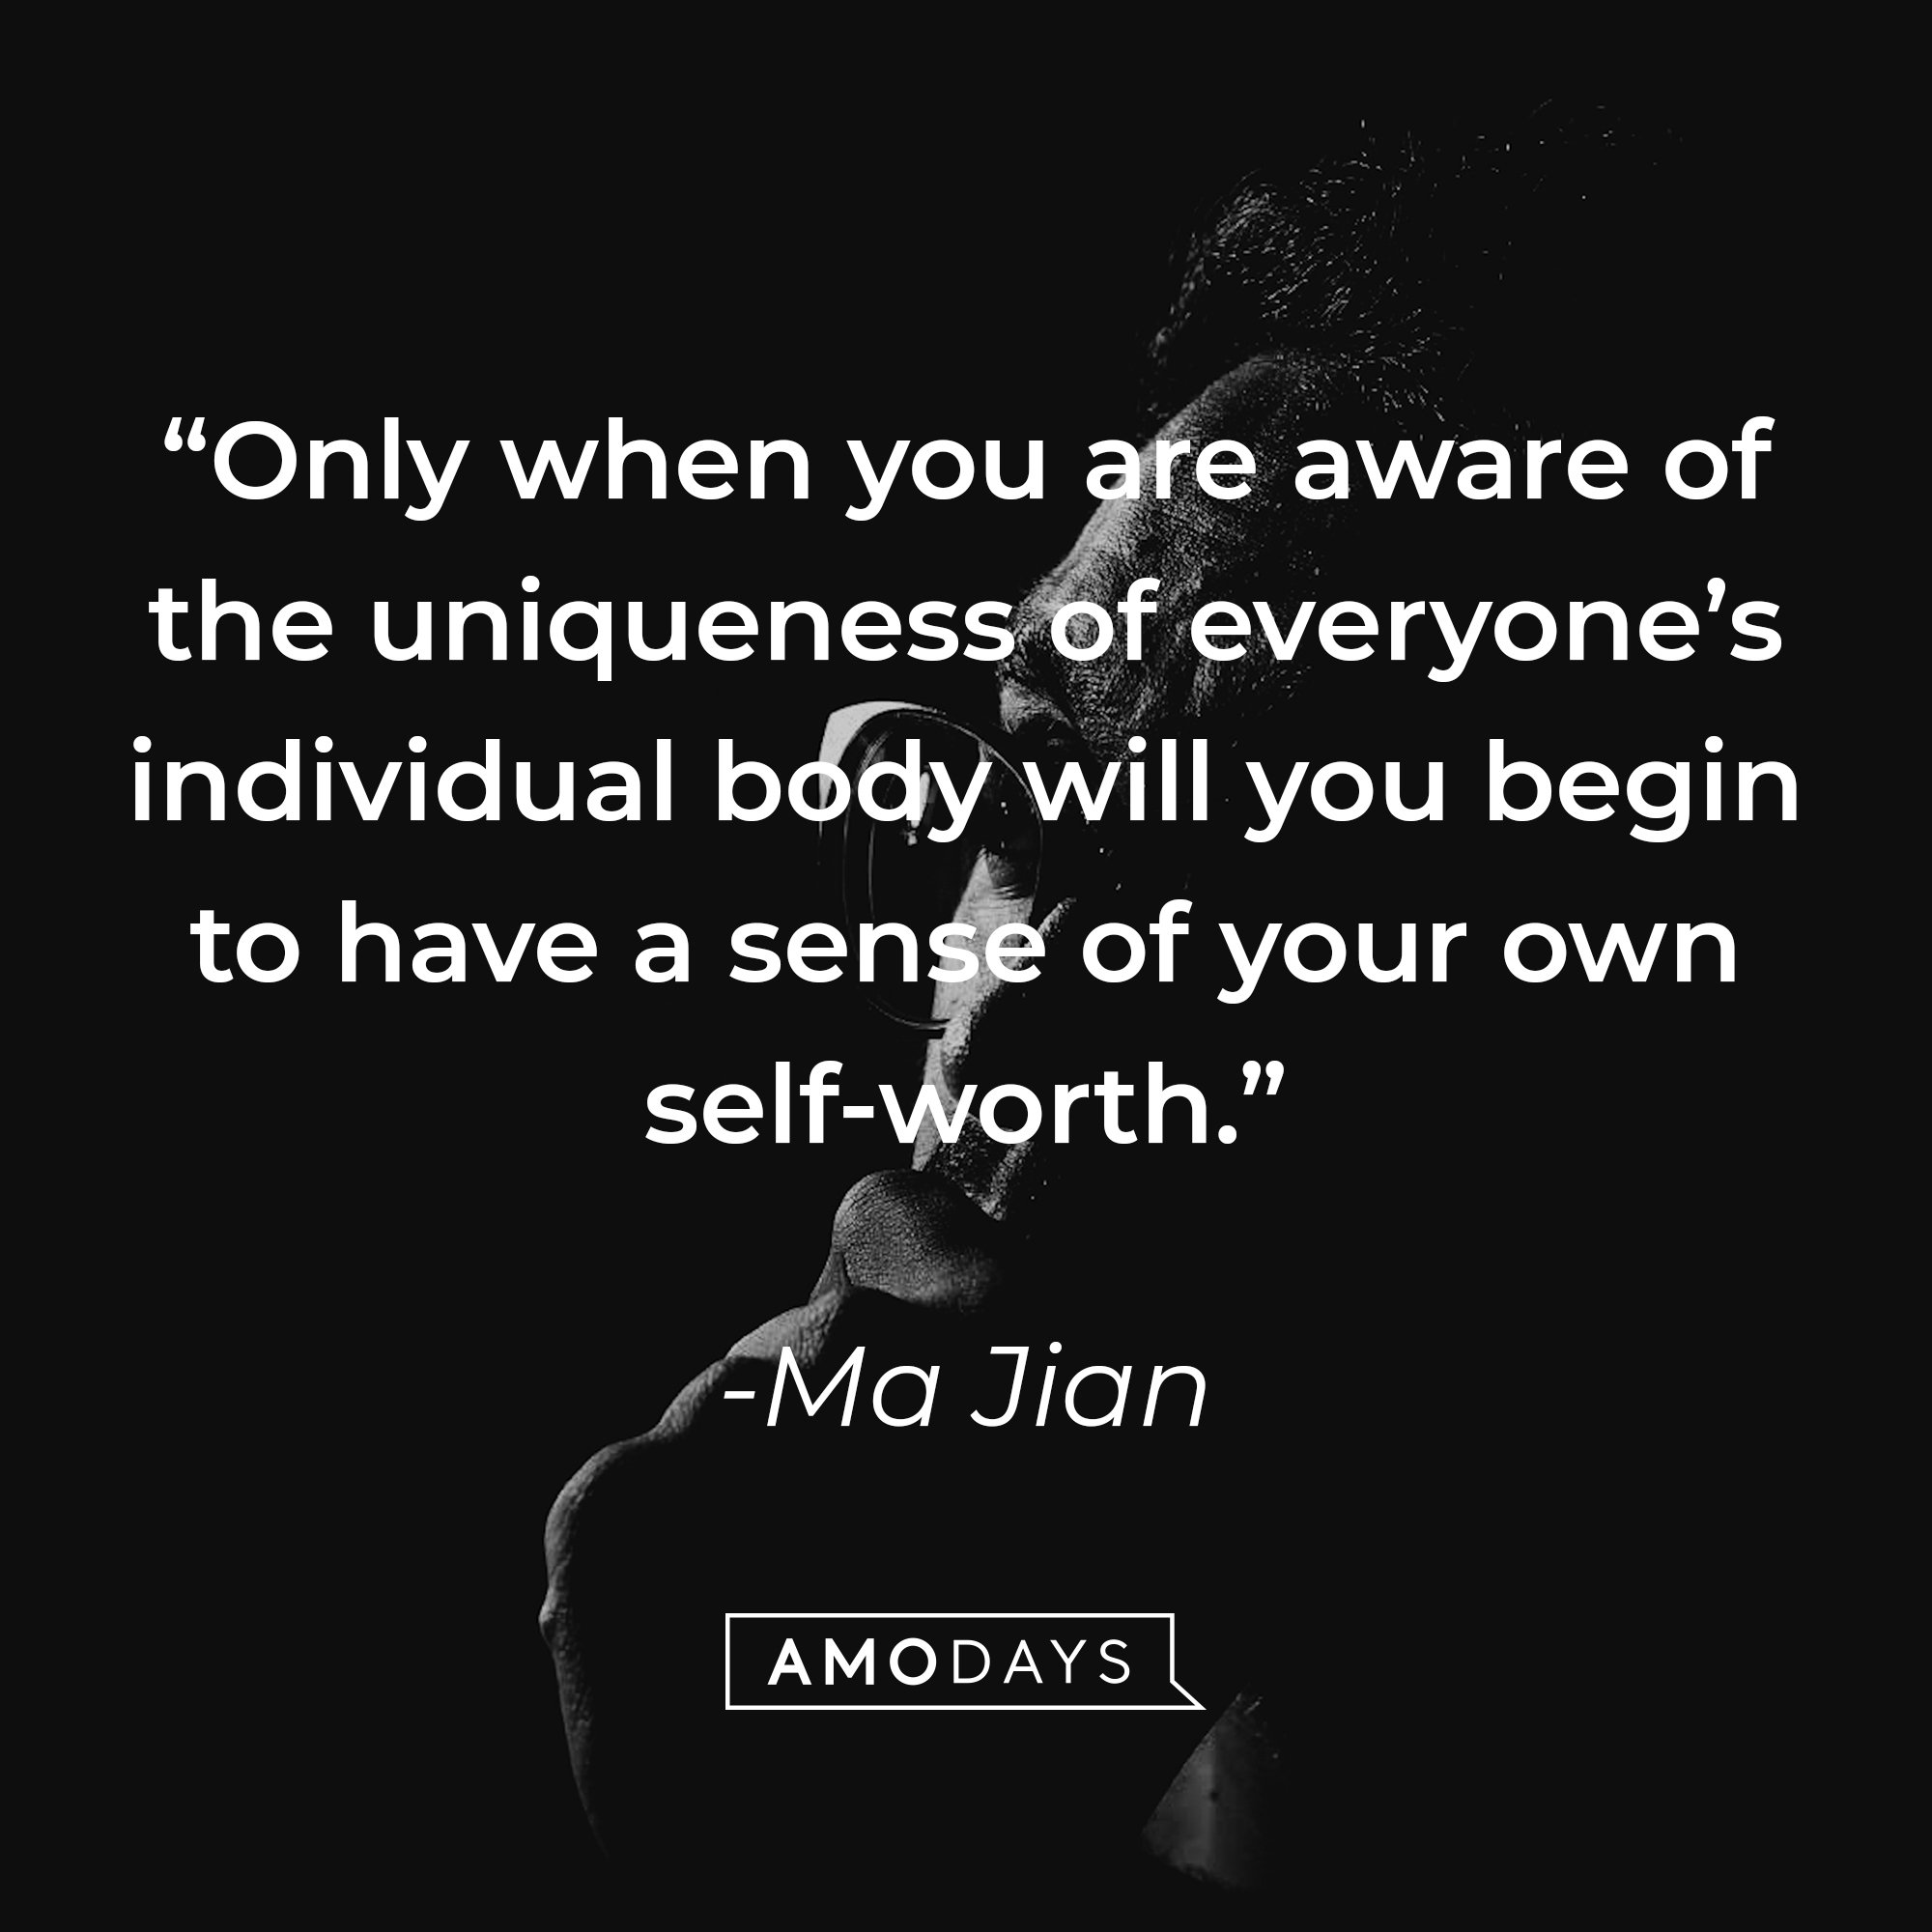 Ma Jian's quote: “Only when you are aware of the uniqueness of everyone’s individual body will you begin to have a sense of your own self-worth.” | Image: AmoDays